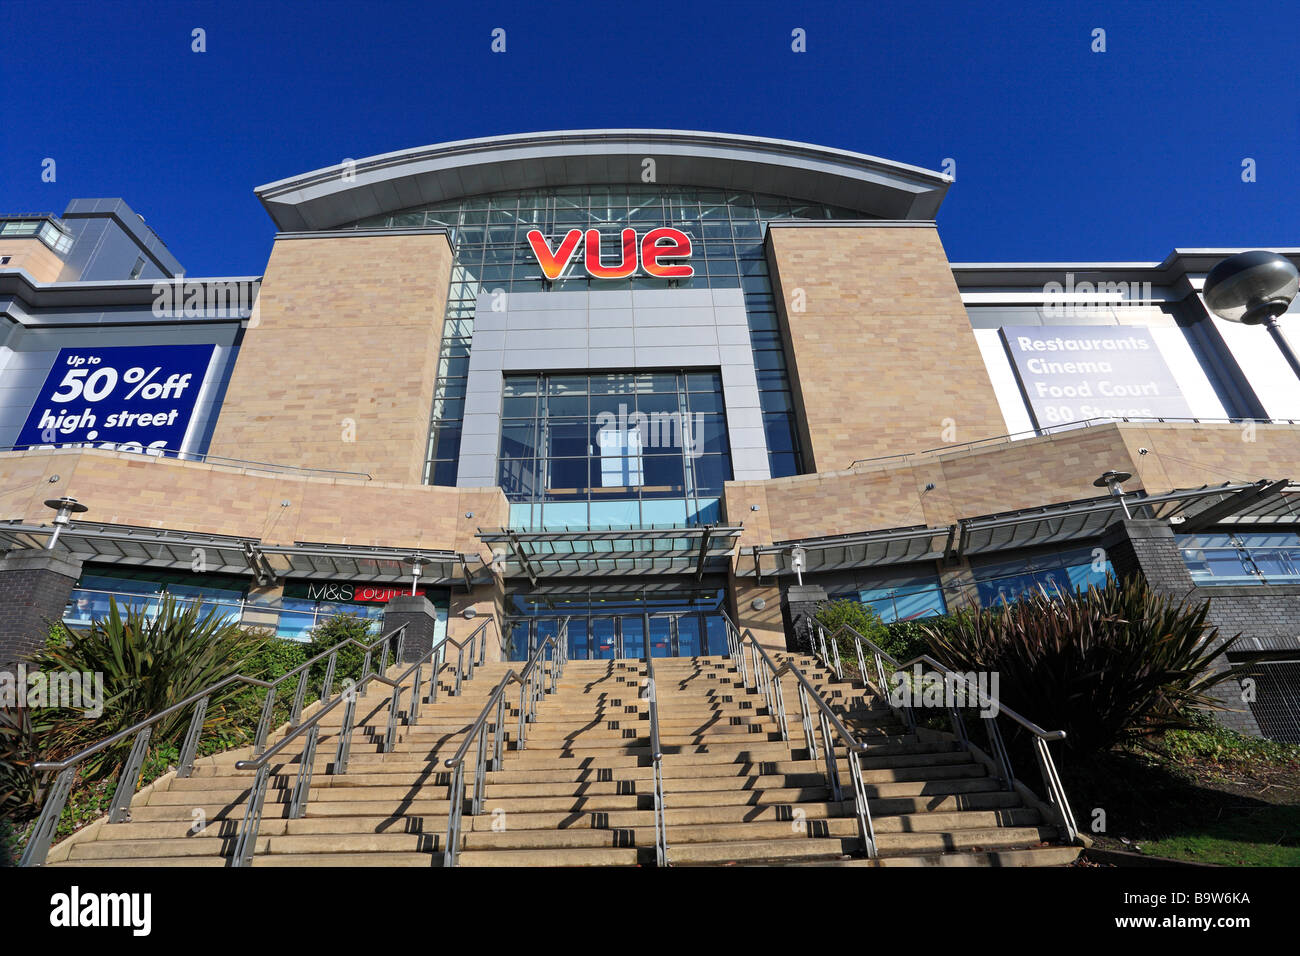 Vue Cinema entrance, Lowry Outlet Mall, Salford Quays, Manchester, Lancashire, England, UK. Stock Photo